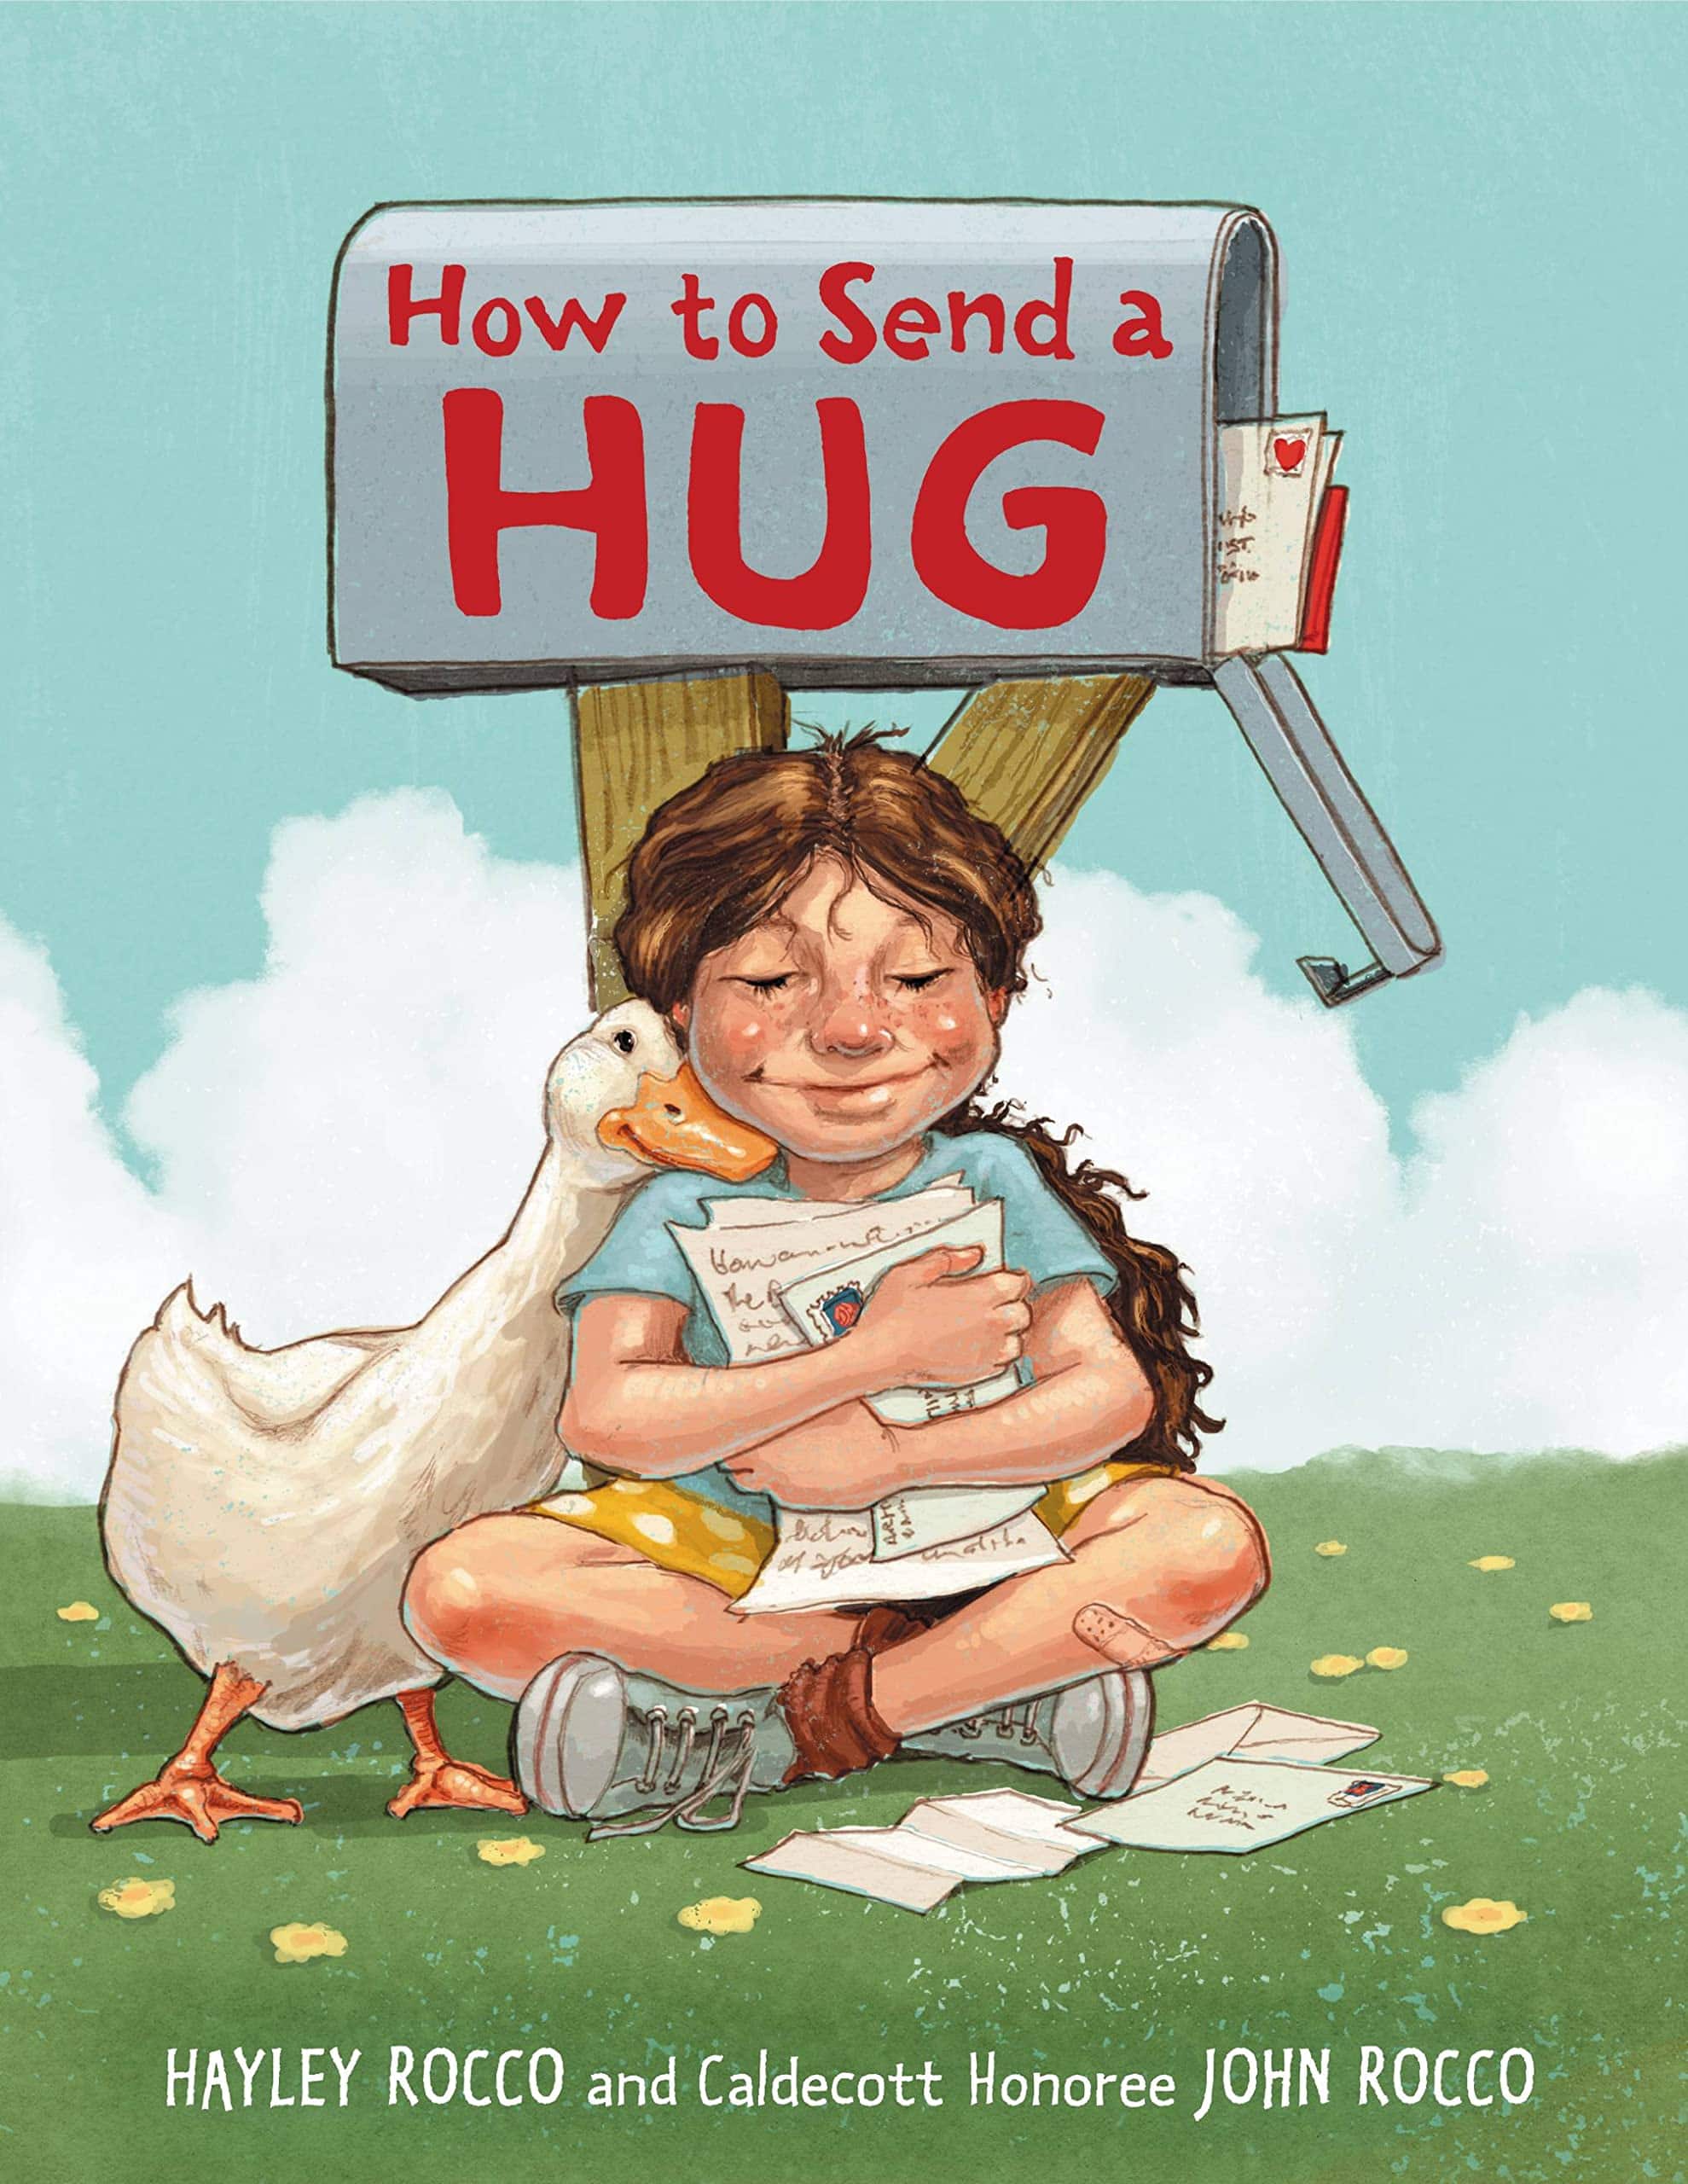 How to Send a Hug book cover with child hugging papers and sitting in front of mailbox with a duck 